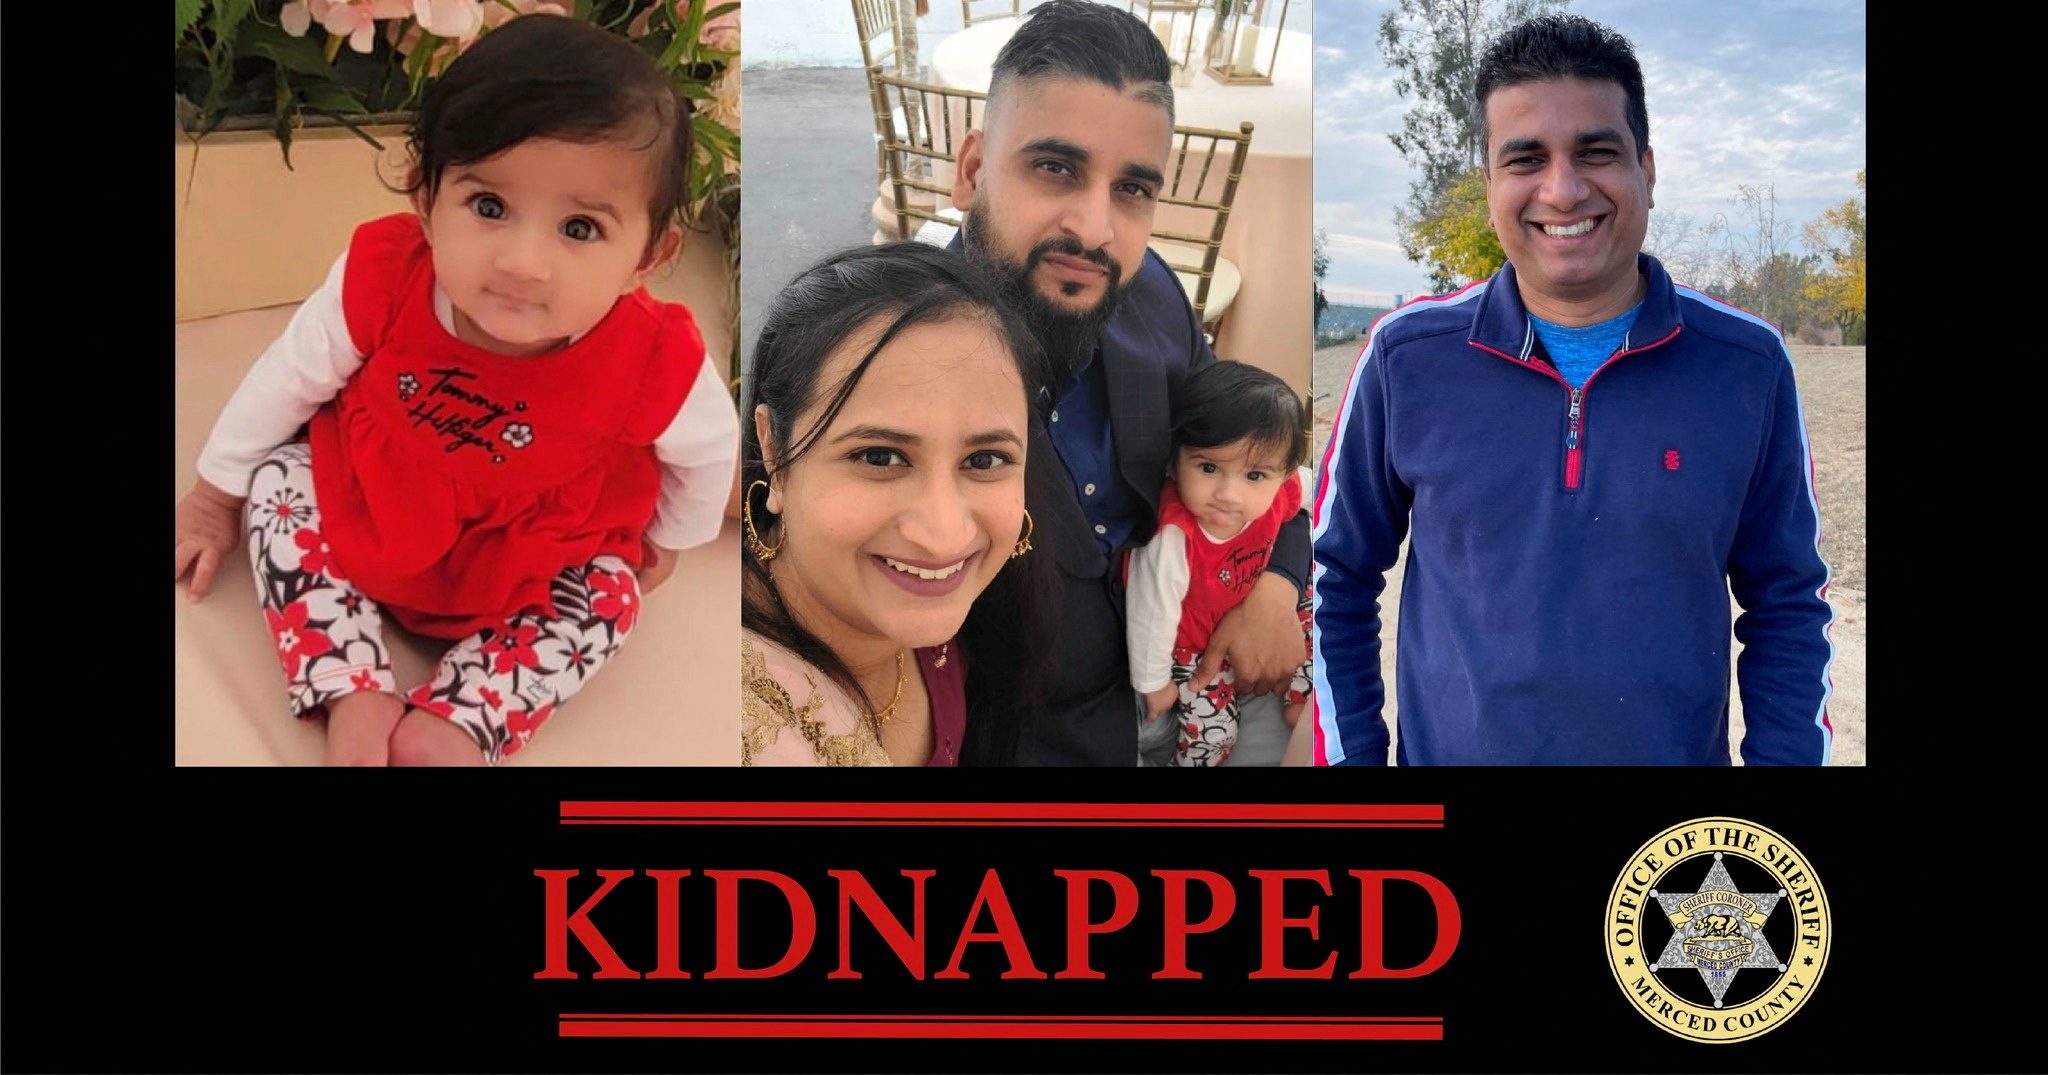 California family kidnapped on October 3 found dead, Sheriff says